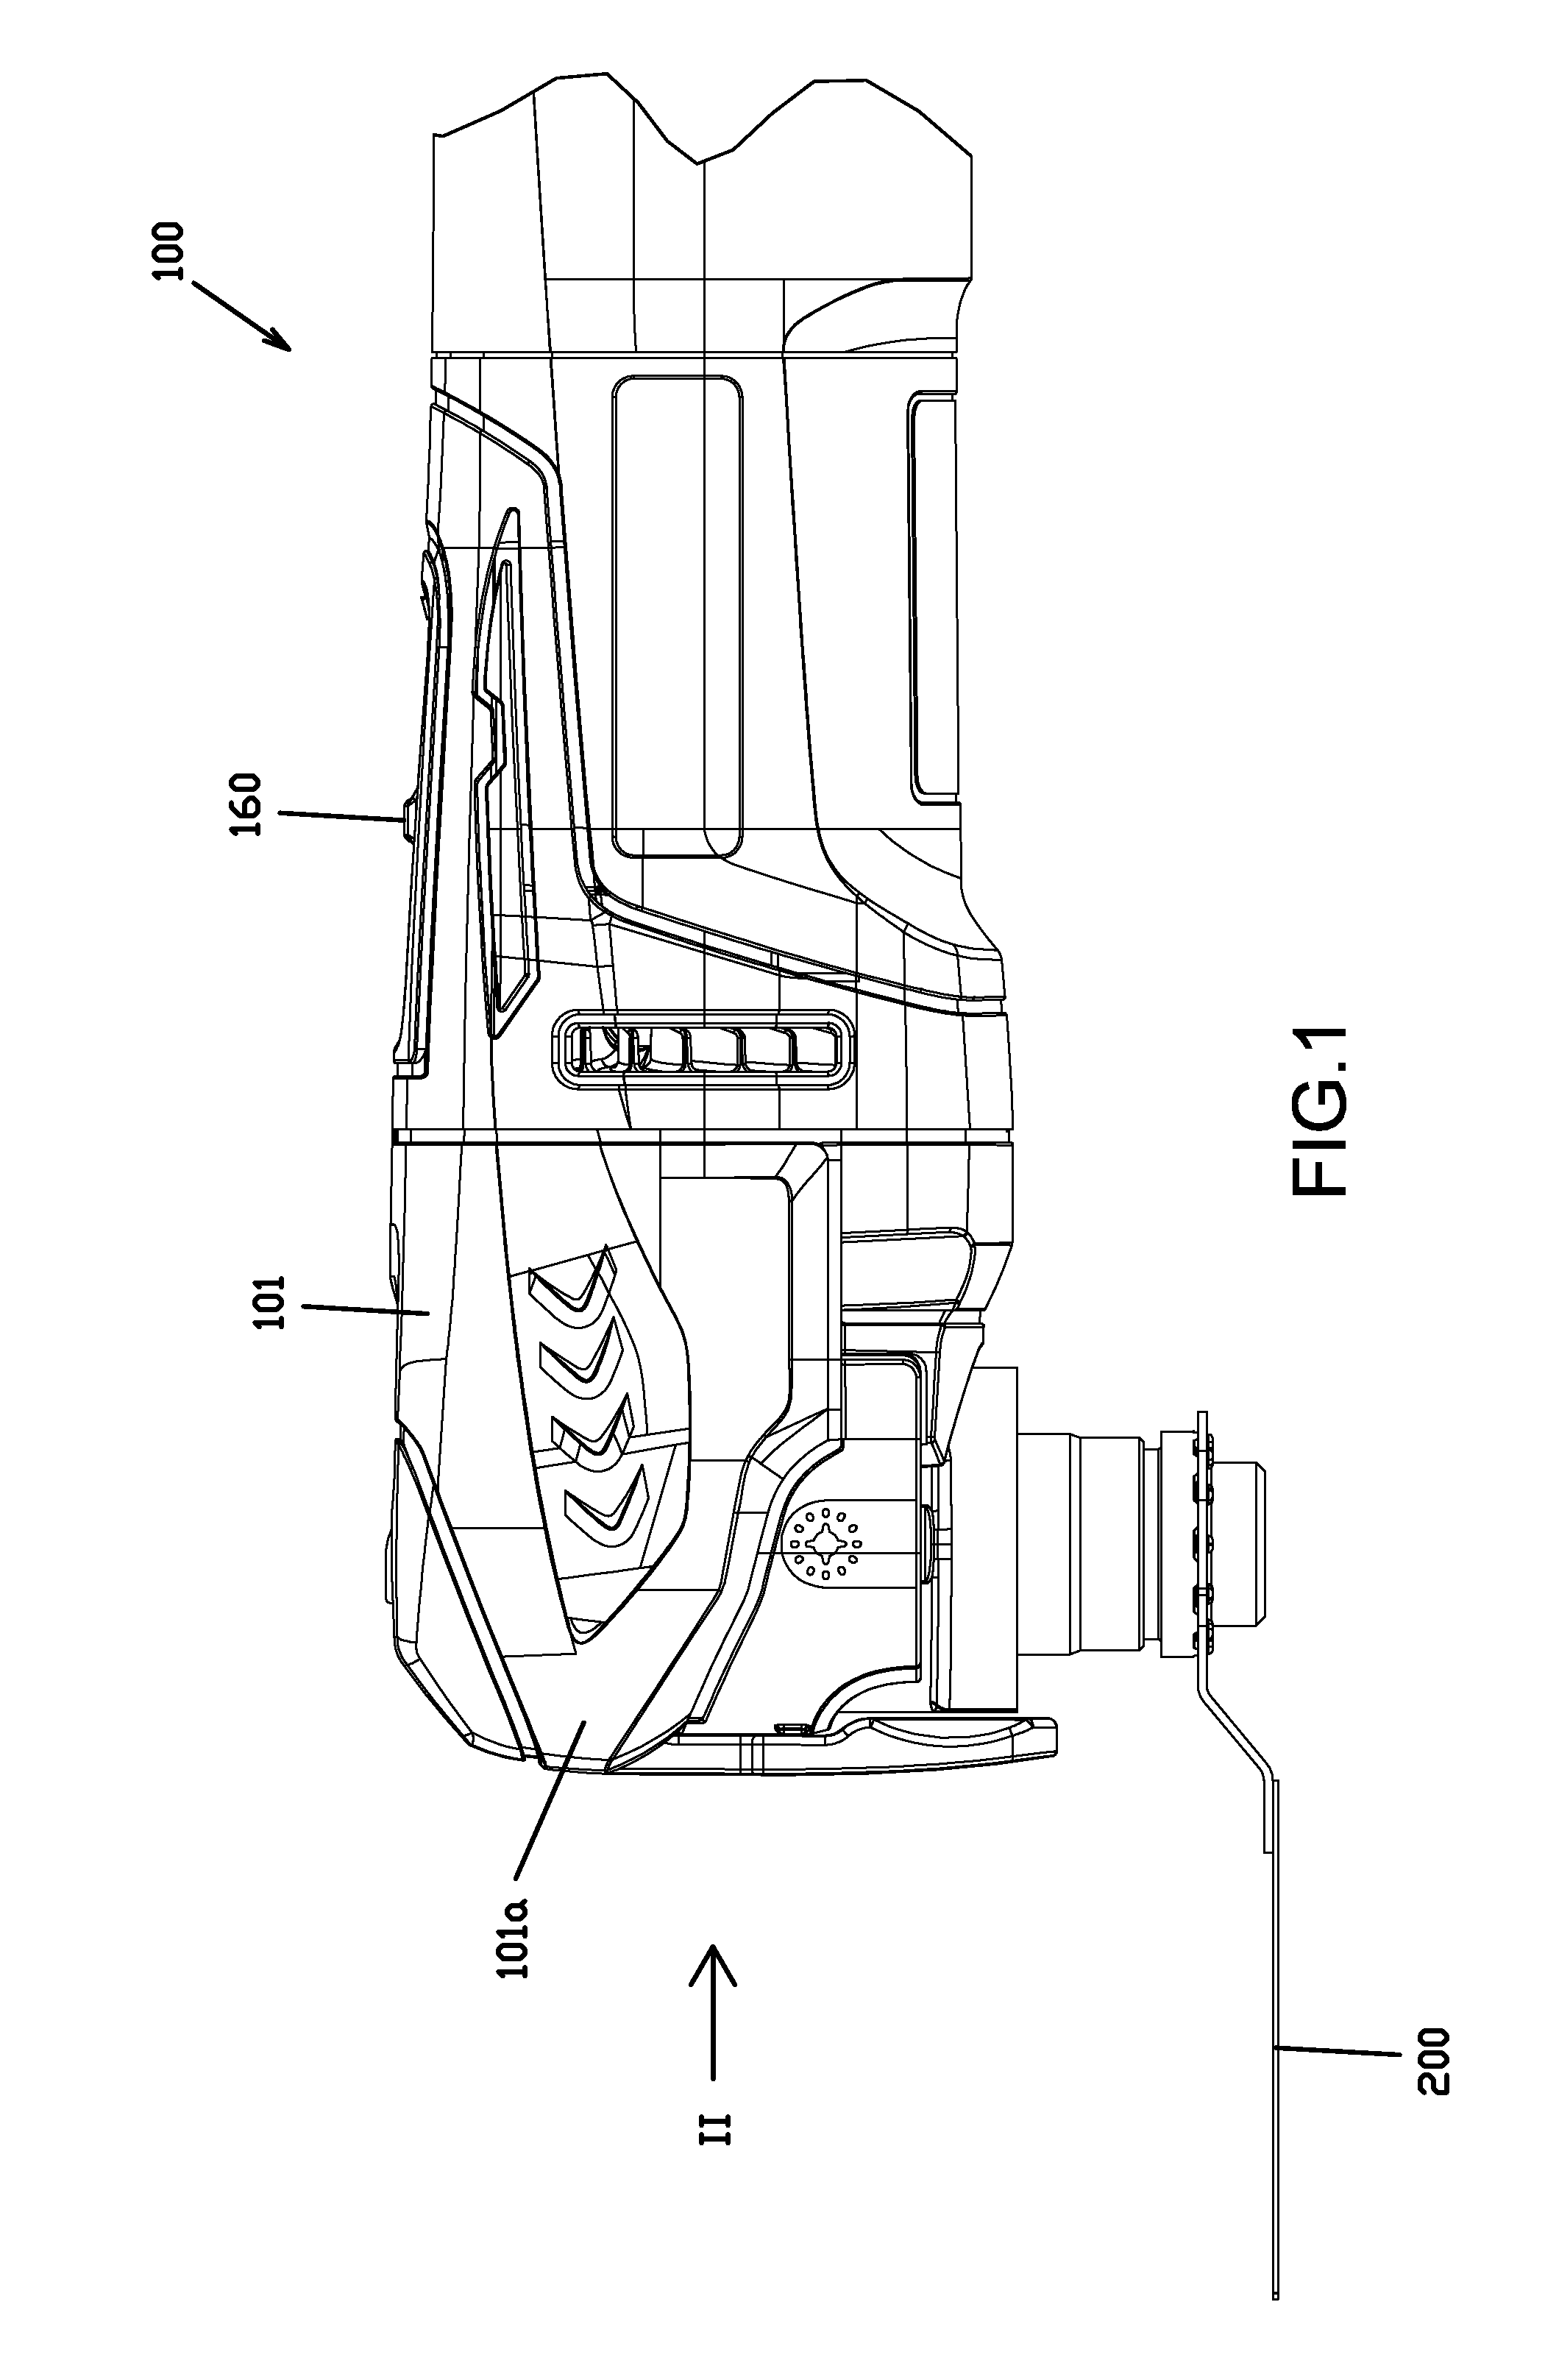 Power tool having improved tool accessory securing mechanism